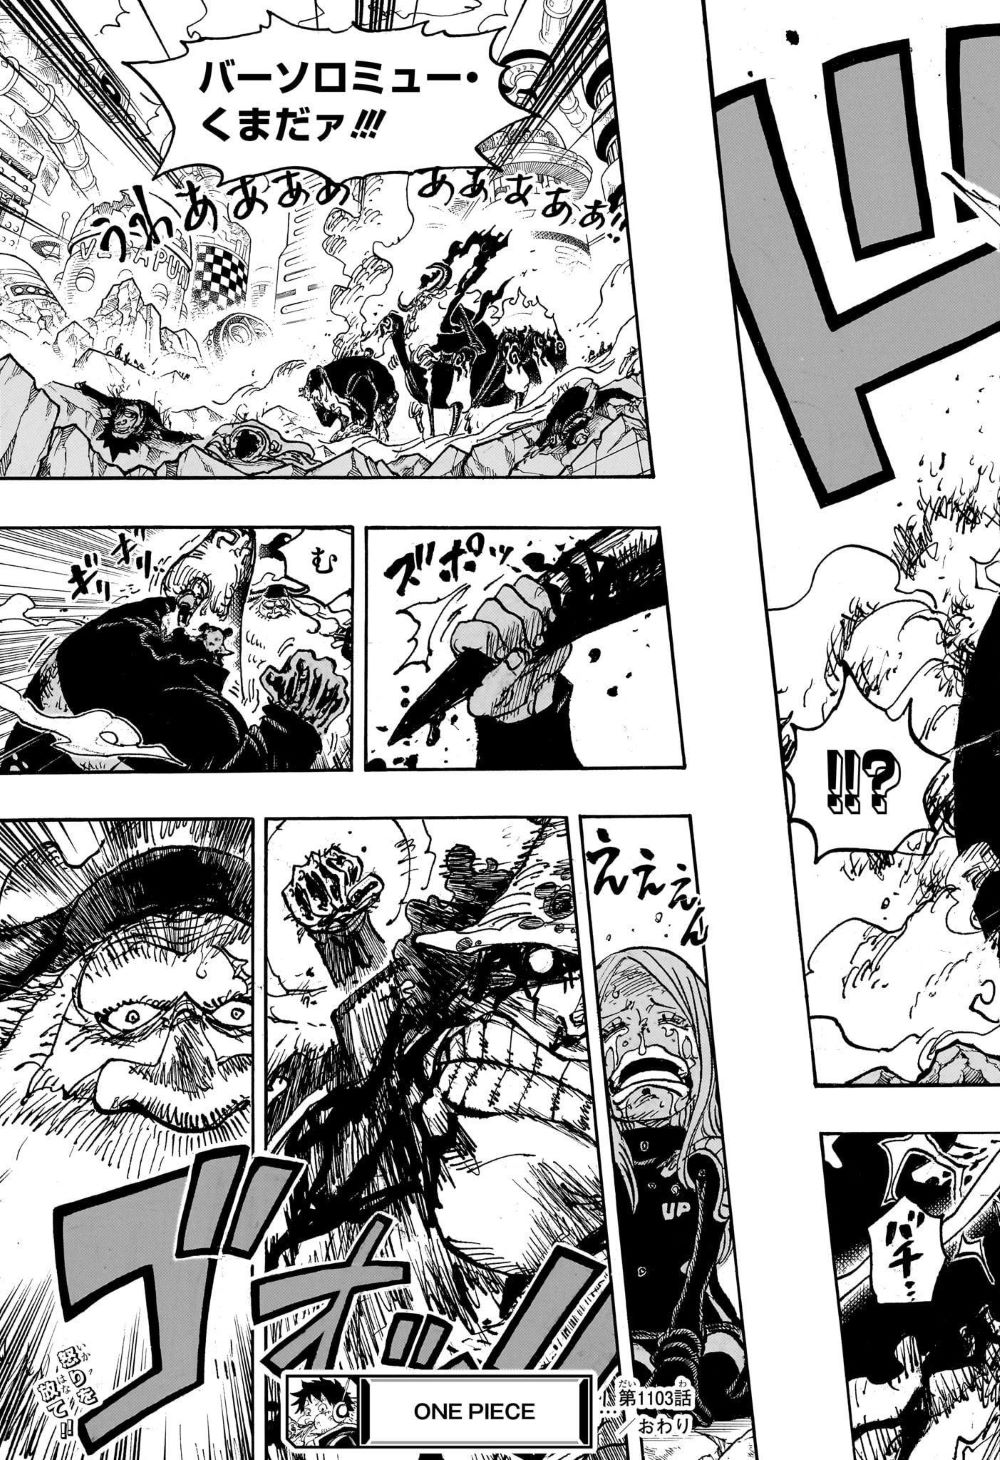 Spoilers for One Piece chapter 1103: What does this new chapter reveal to us